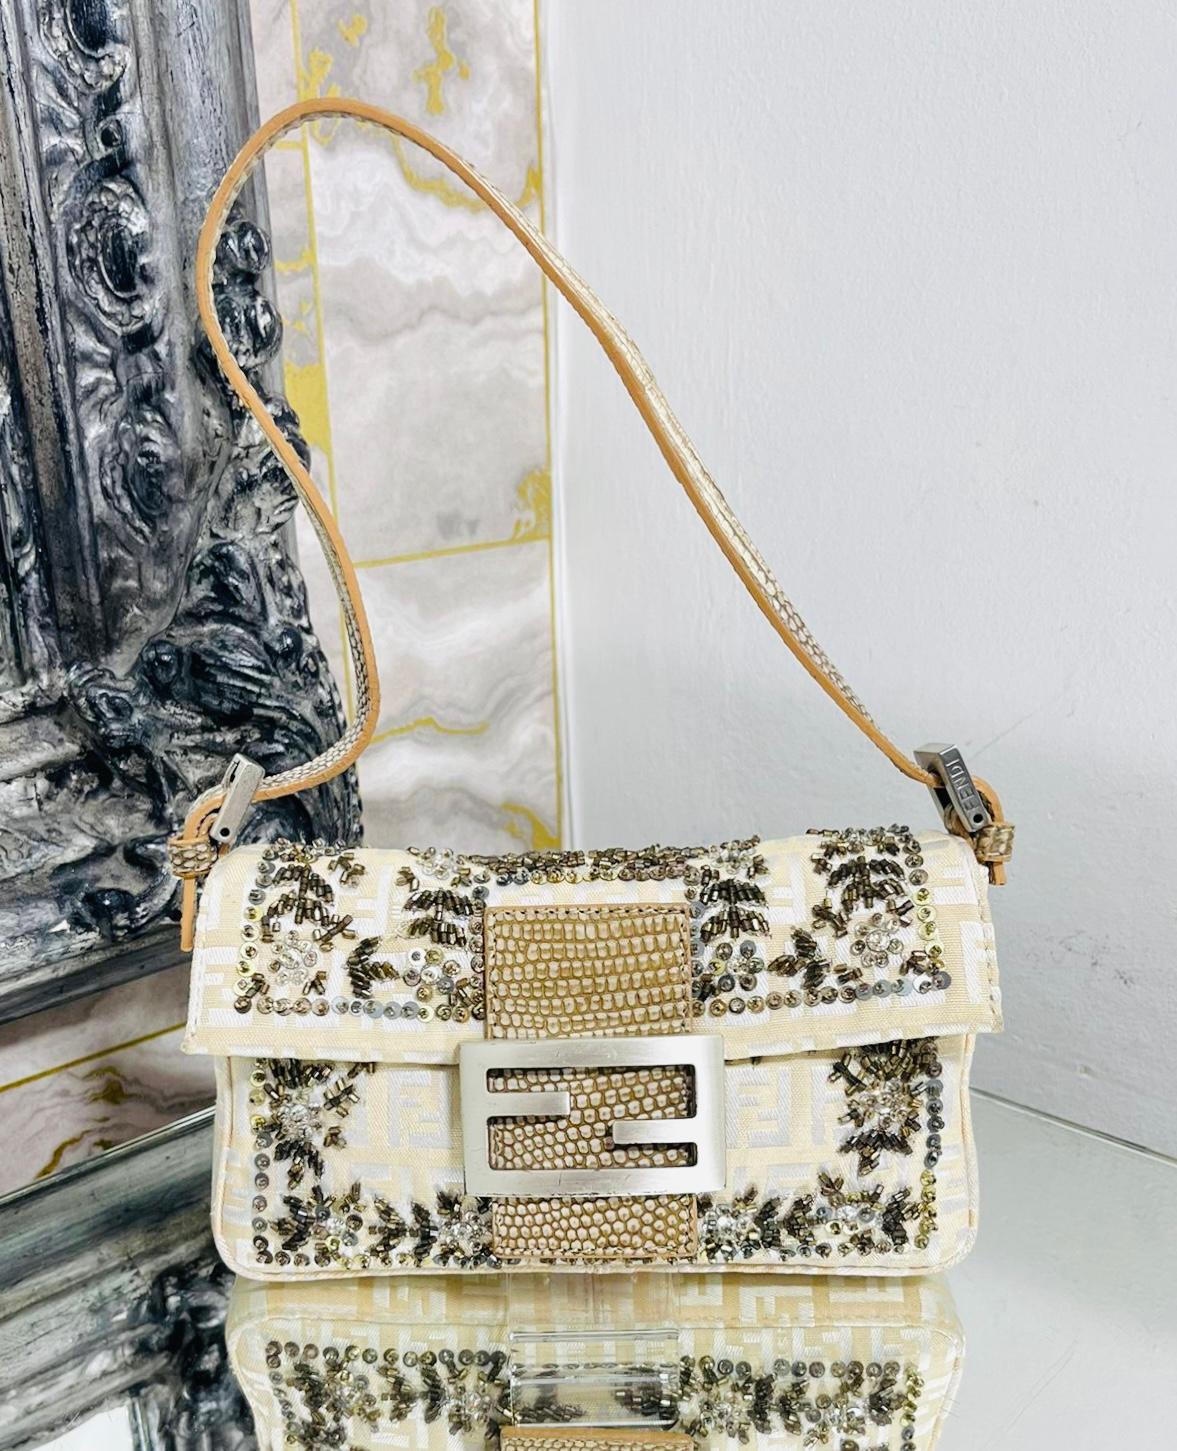 Fendi Bead Embroidered Canvas & Snakeskin 'FF' Logo Baguette Bag

Ivory shoulder bag designed with brown and beige bead embroidery on 'FF' logo printed canvas.

Styled with silver 'FF' logo snap closure with leather detail and adjustable shoulder